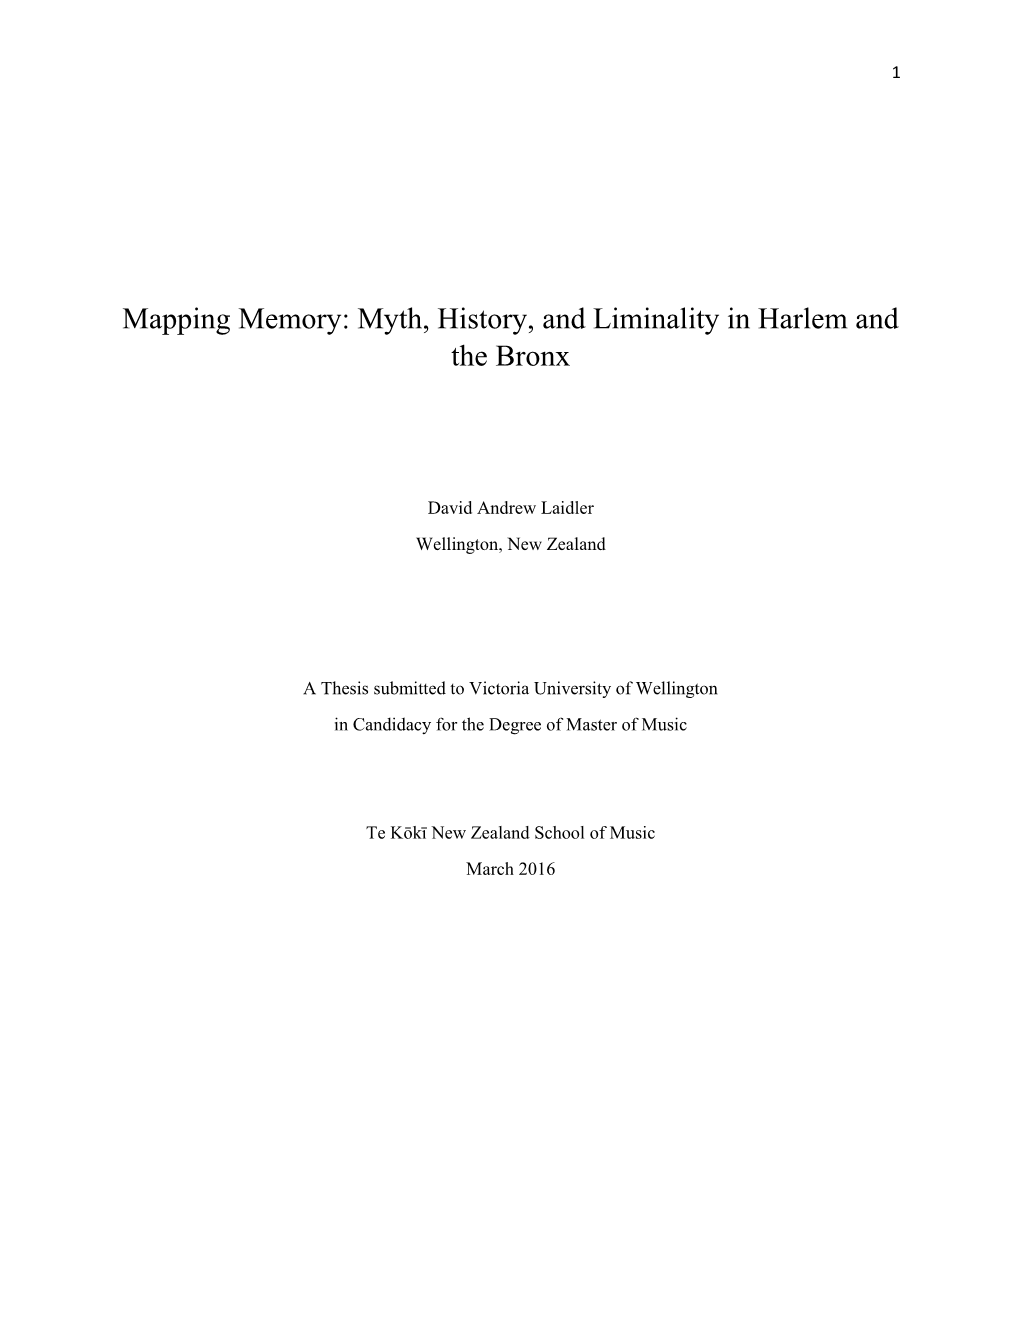 Myth, History, and Liminality in Harlem and the Bronx